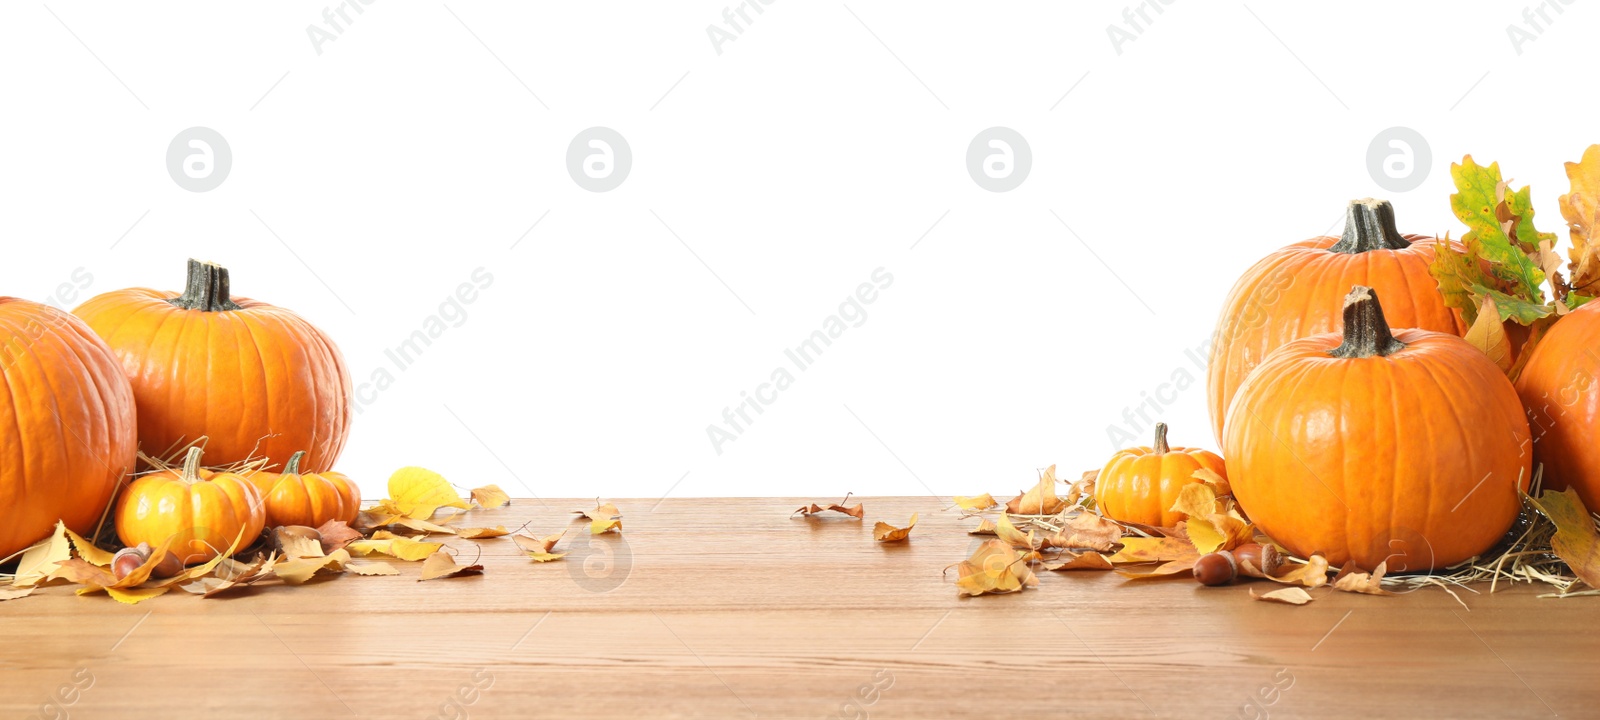 Photo of Composition with ripe pumpkins and autumn leaves on wooden table against white background. Happy Thanksgiving day